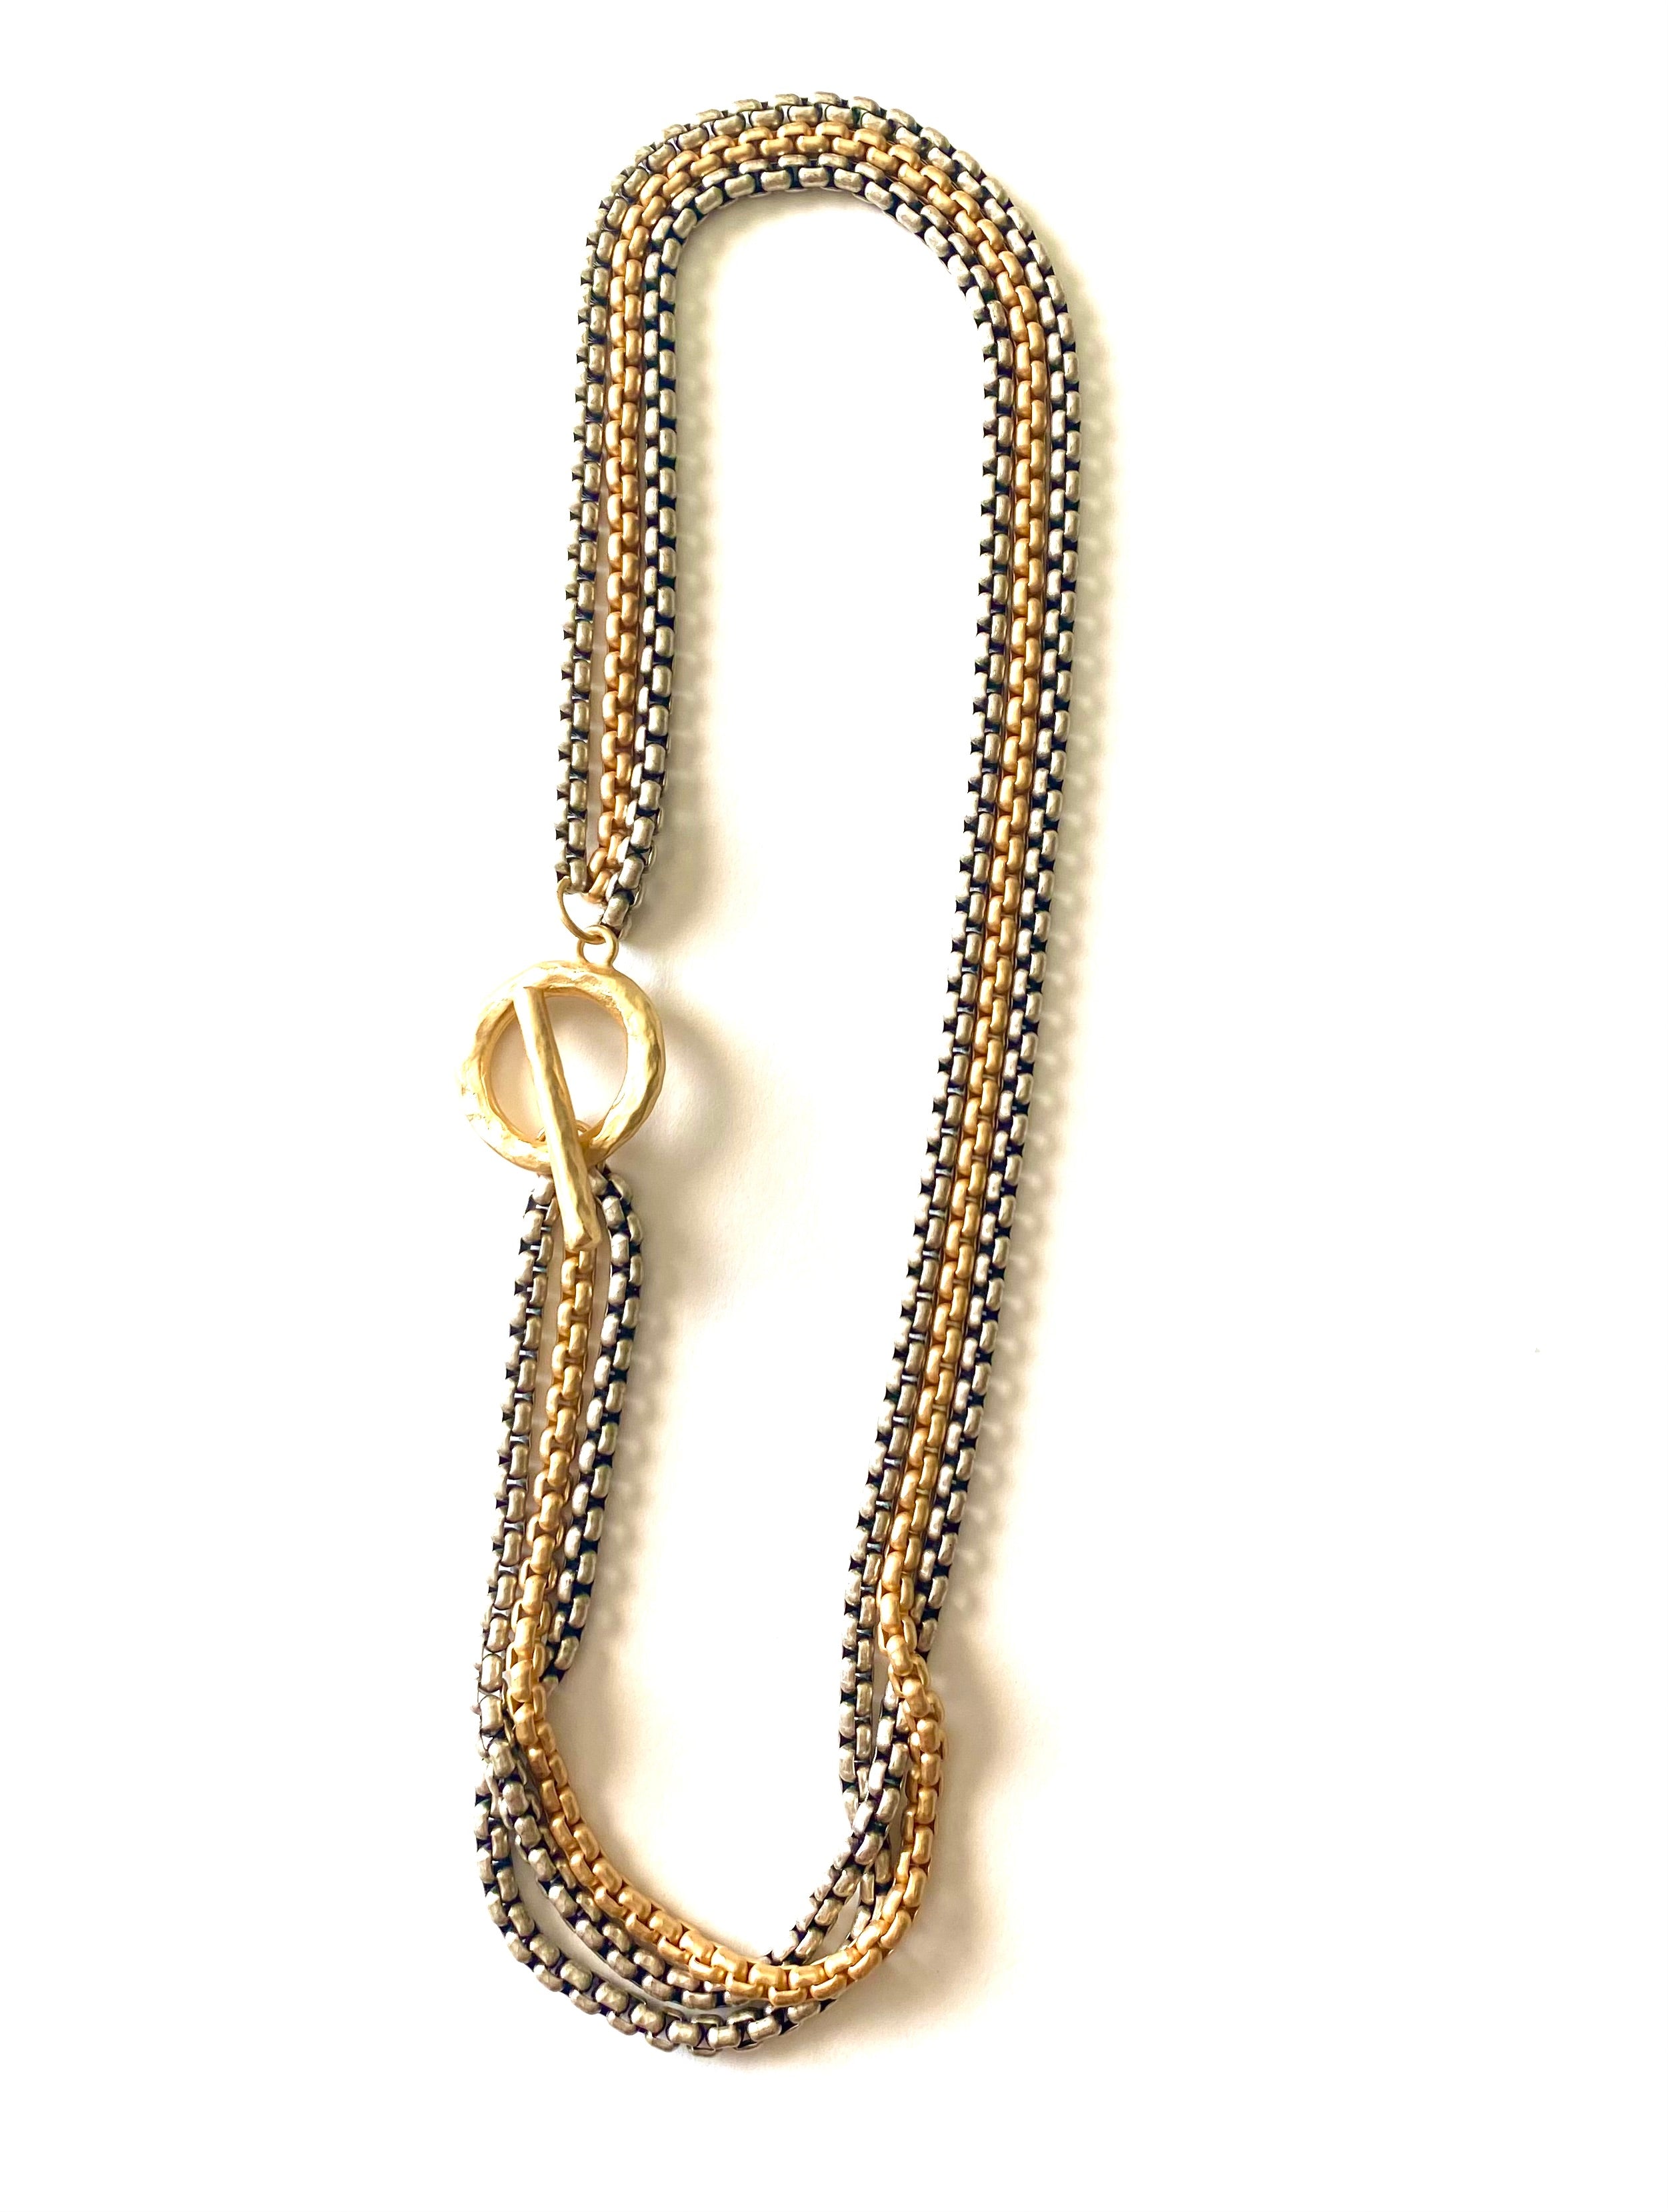 Bryce 2 - Multi-chain necklace of mixed metals with gold toggle